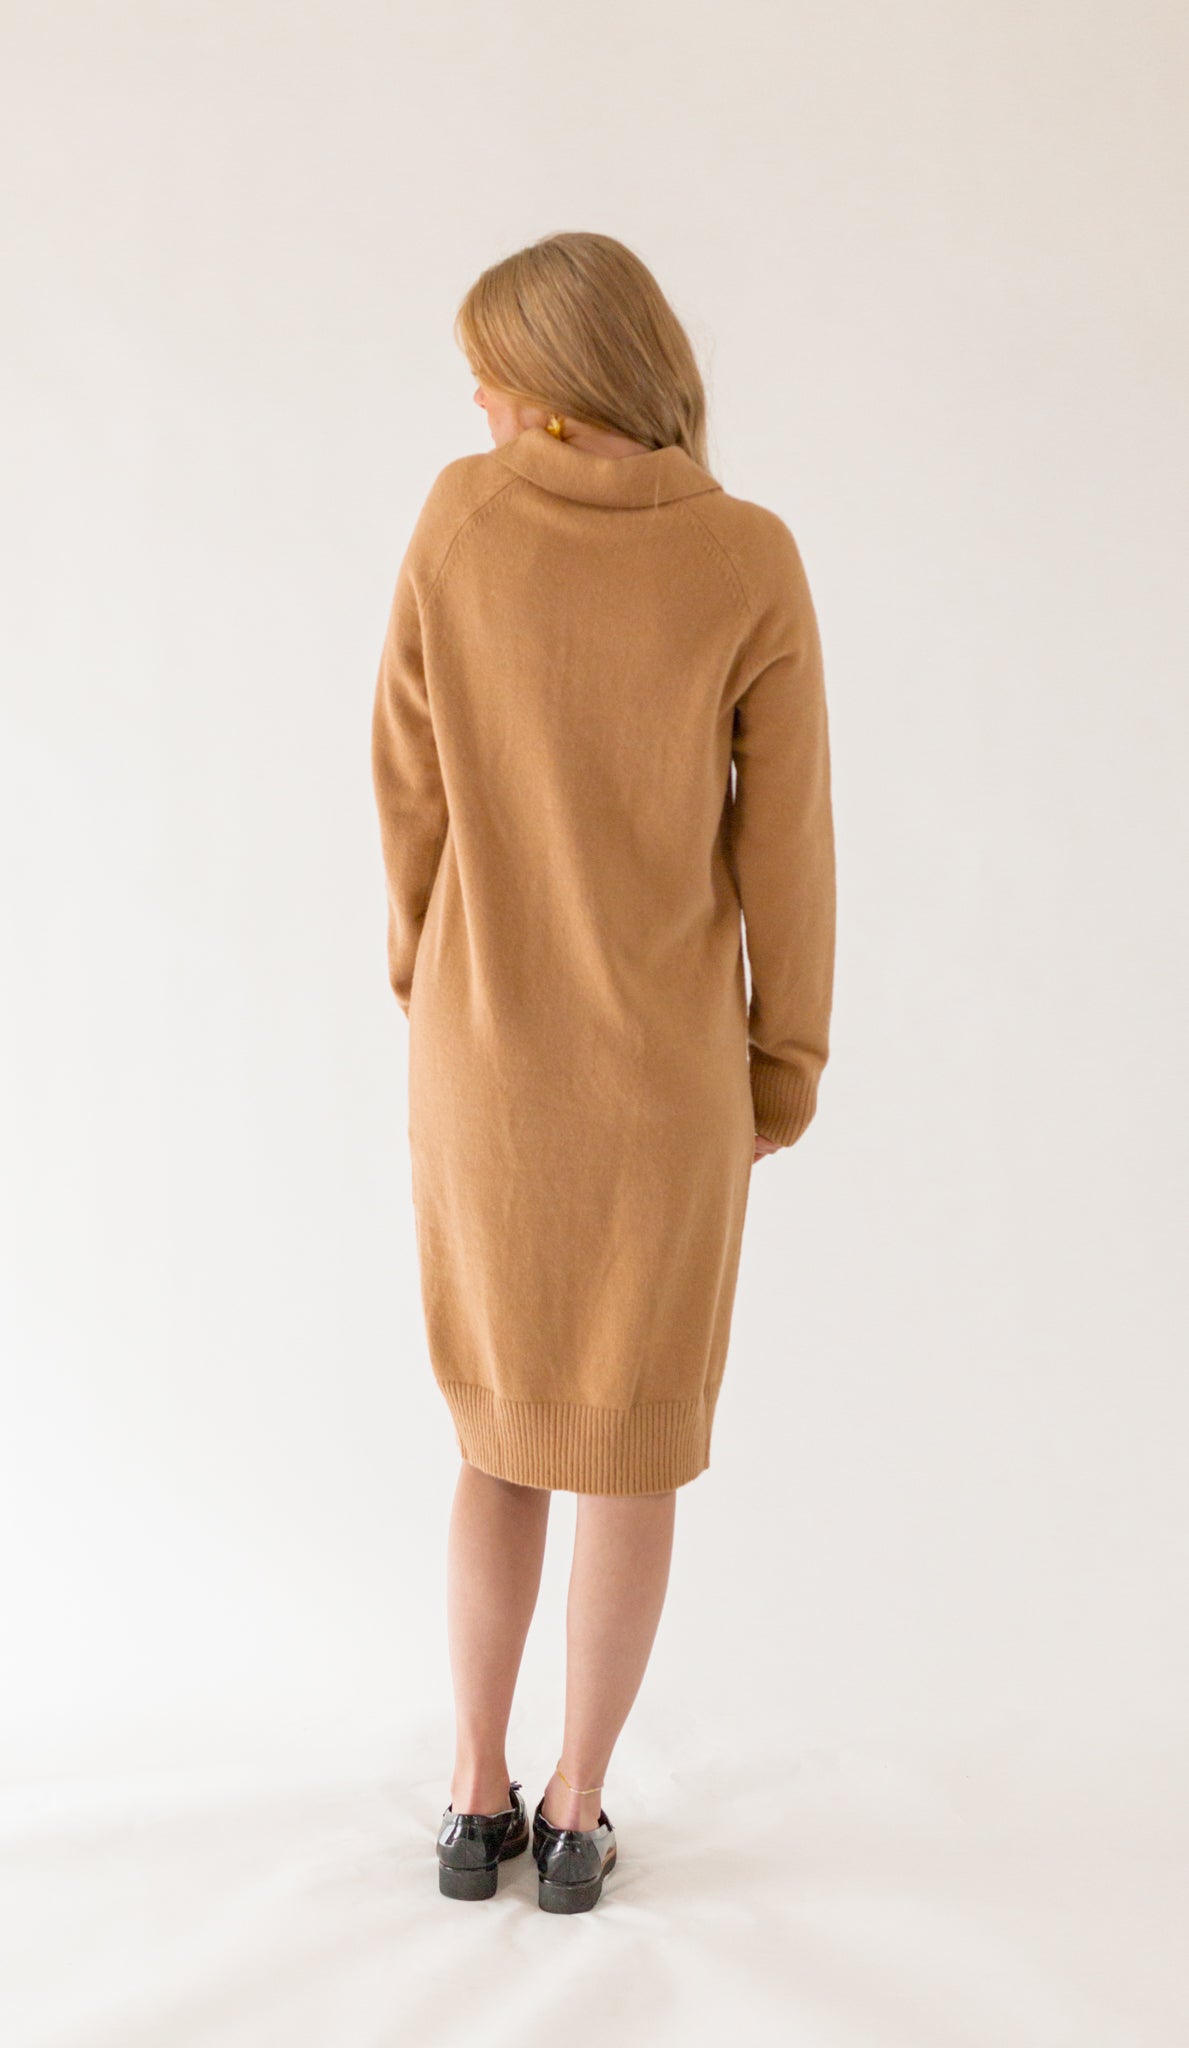 Whesly Sweater Dress